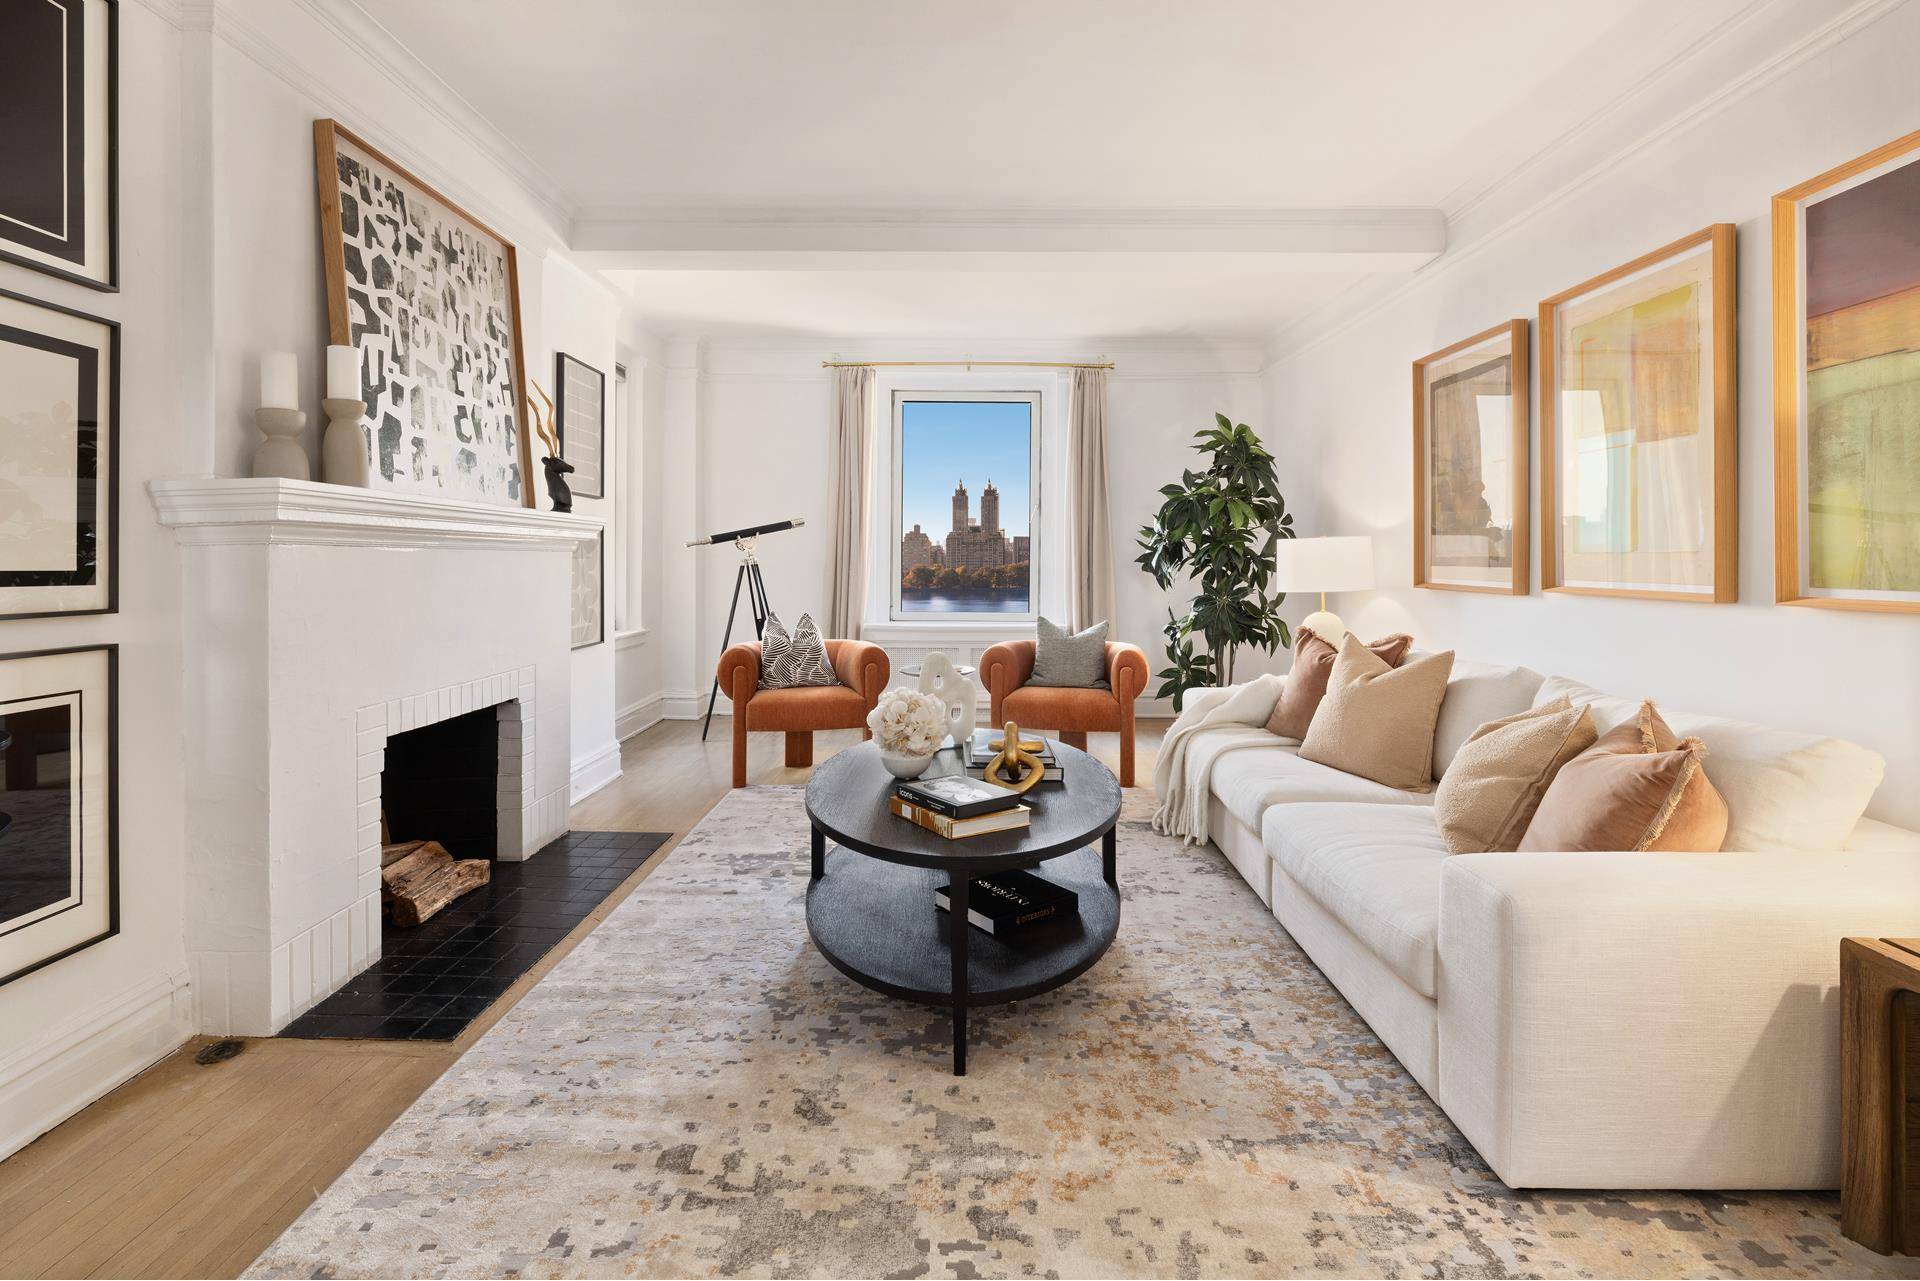 Behold sensational views of the Jacqueline Kennedy Onassis Reservoir in Central Park immediately upon entering into this elegant classic six.